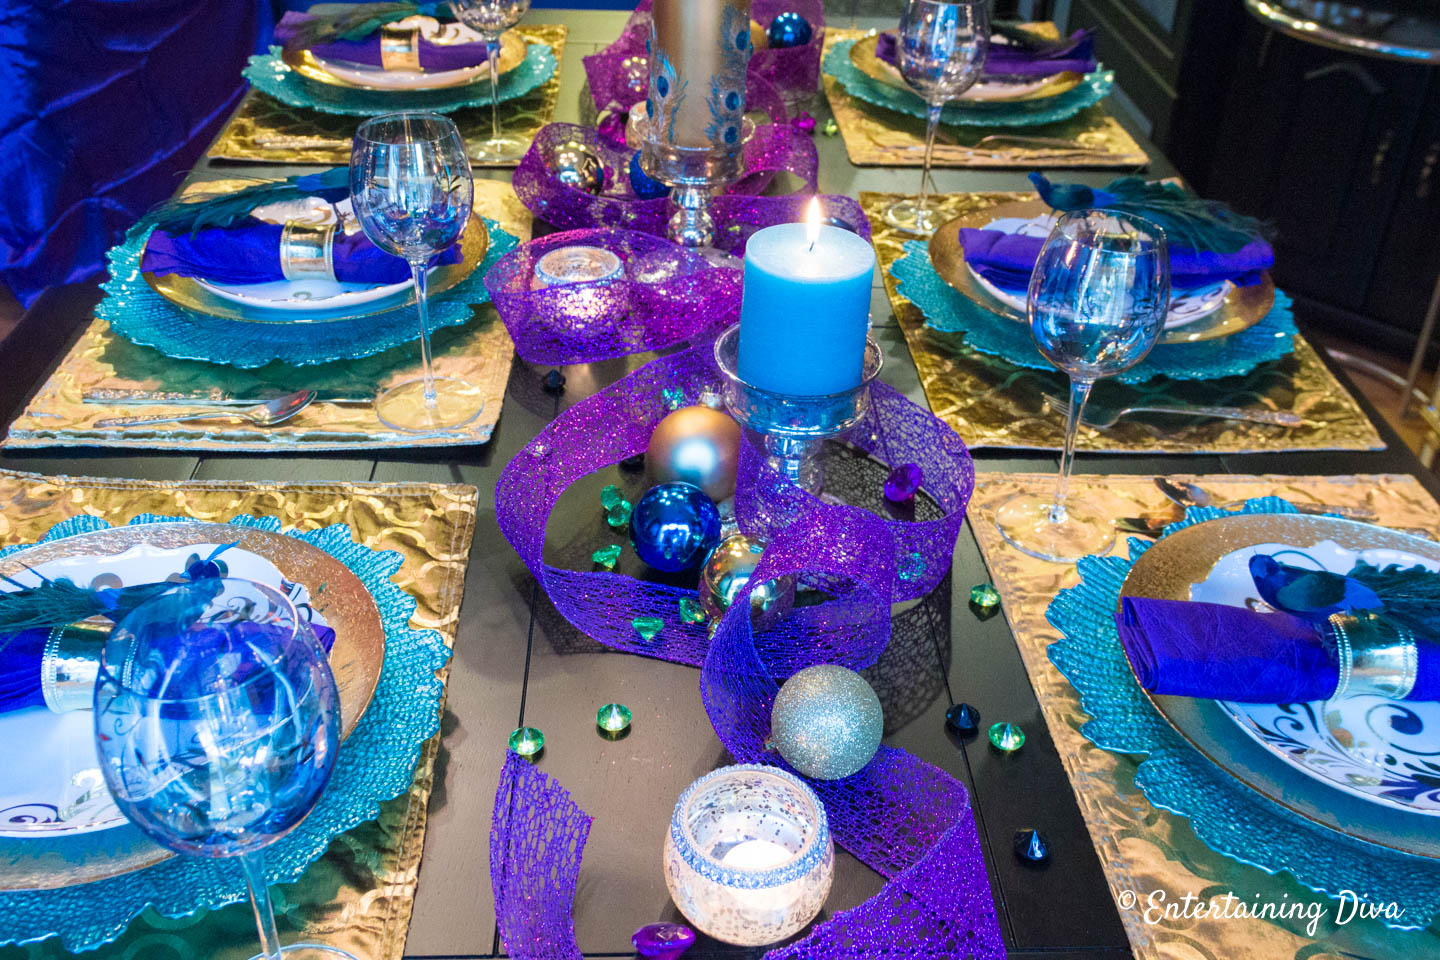 Mardi Gras table centerpiece made with purple, green and gold ribbon, ornaments and candles